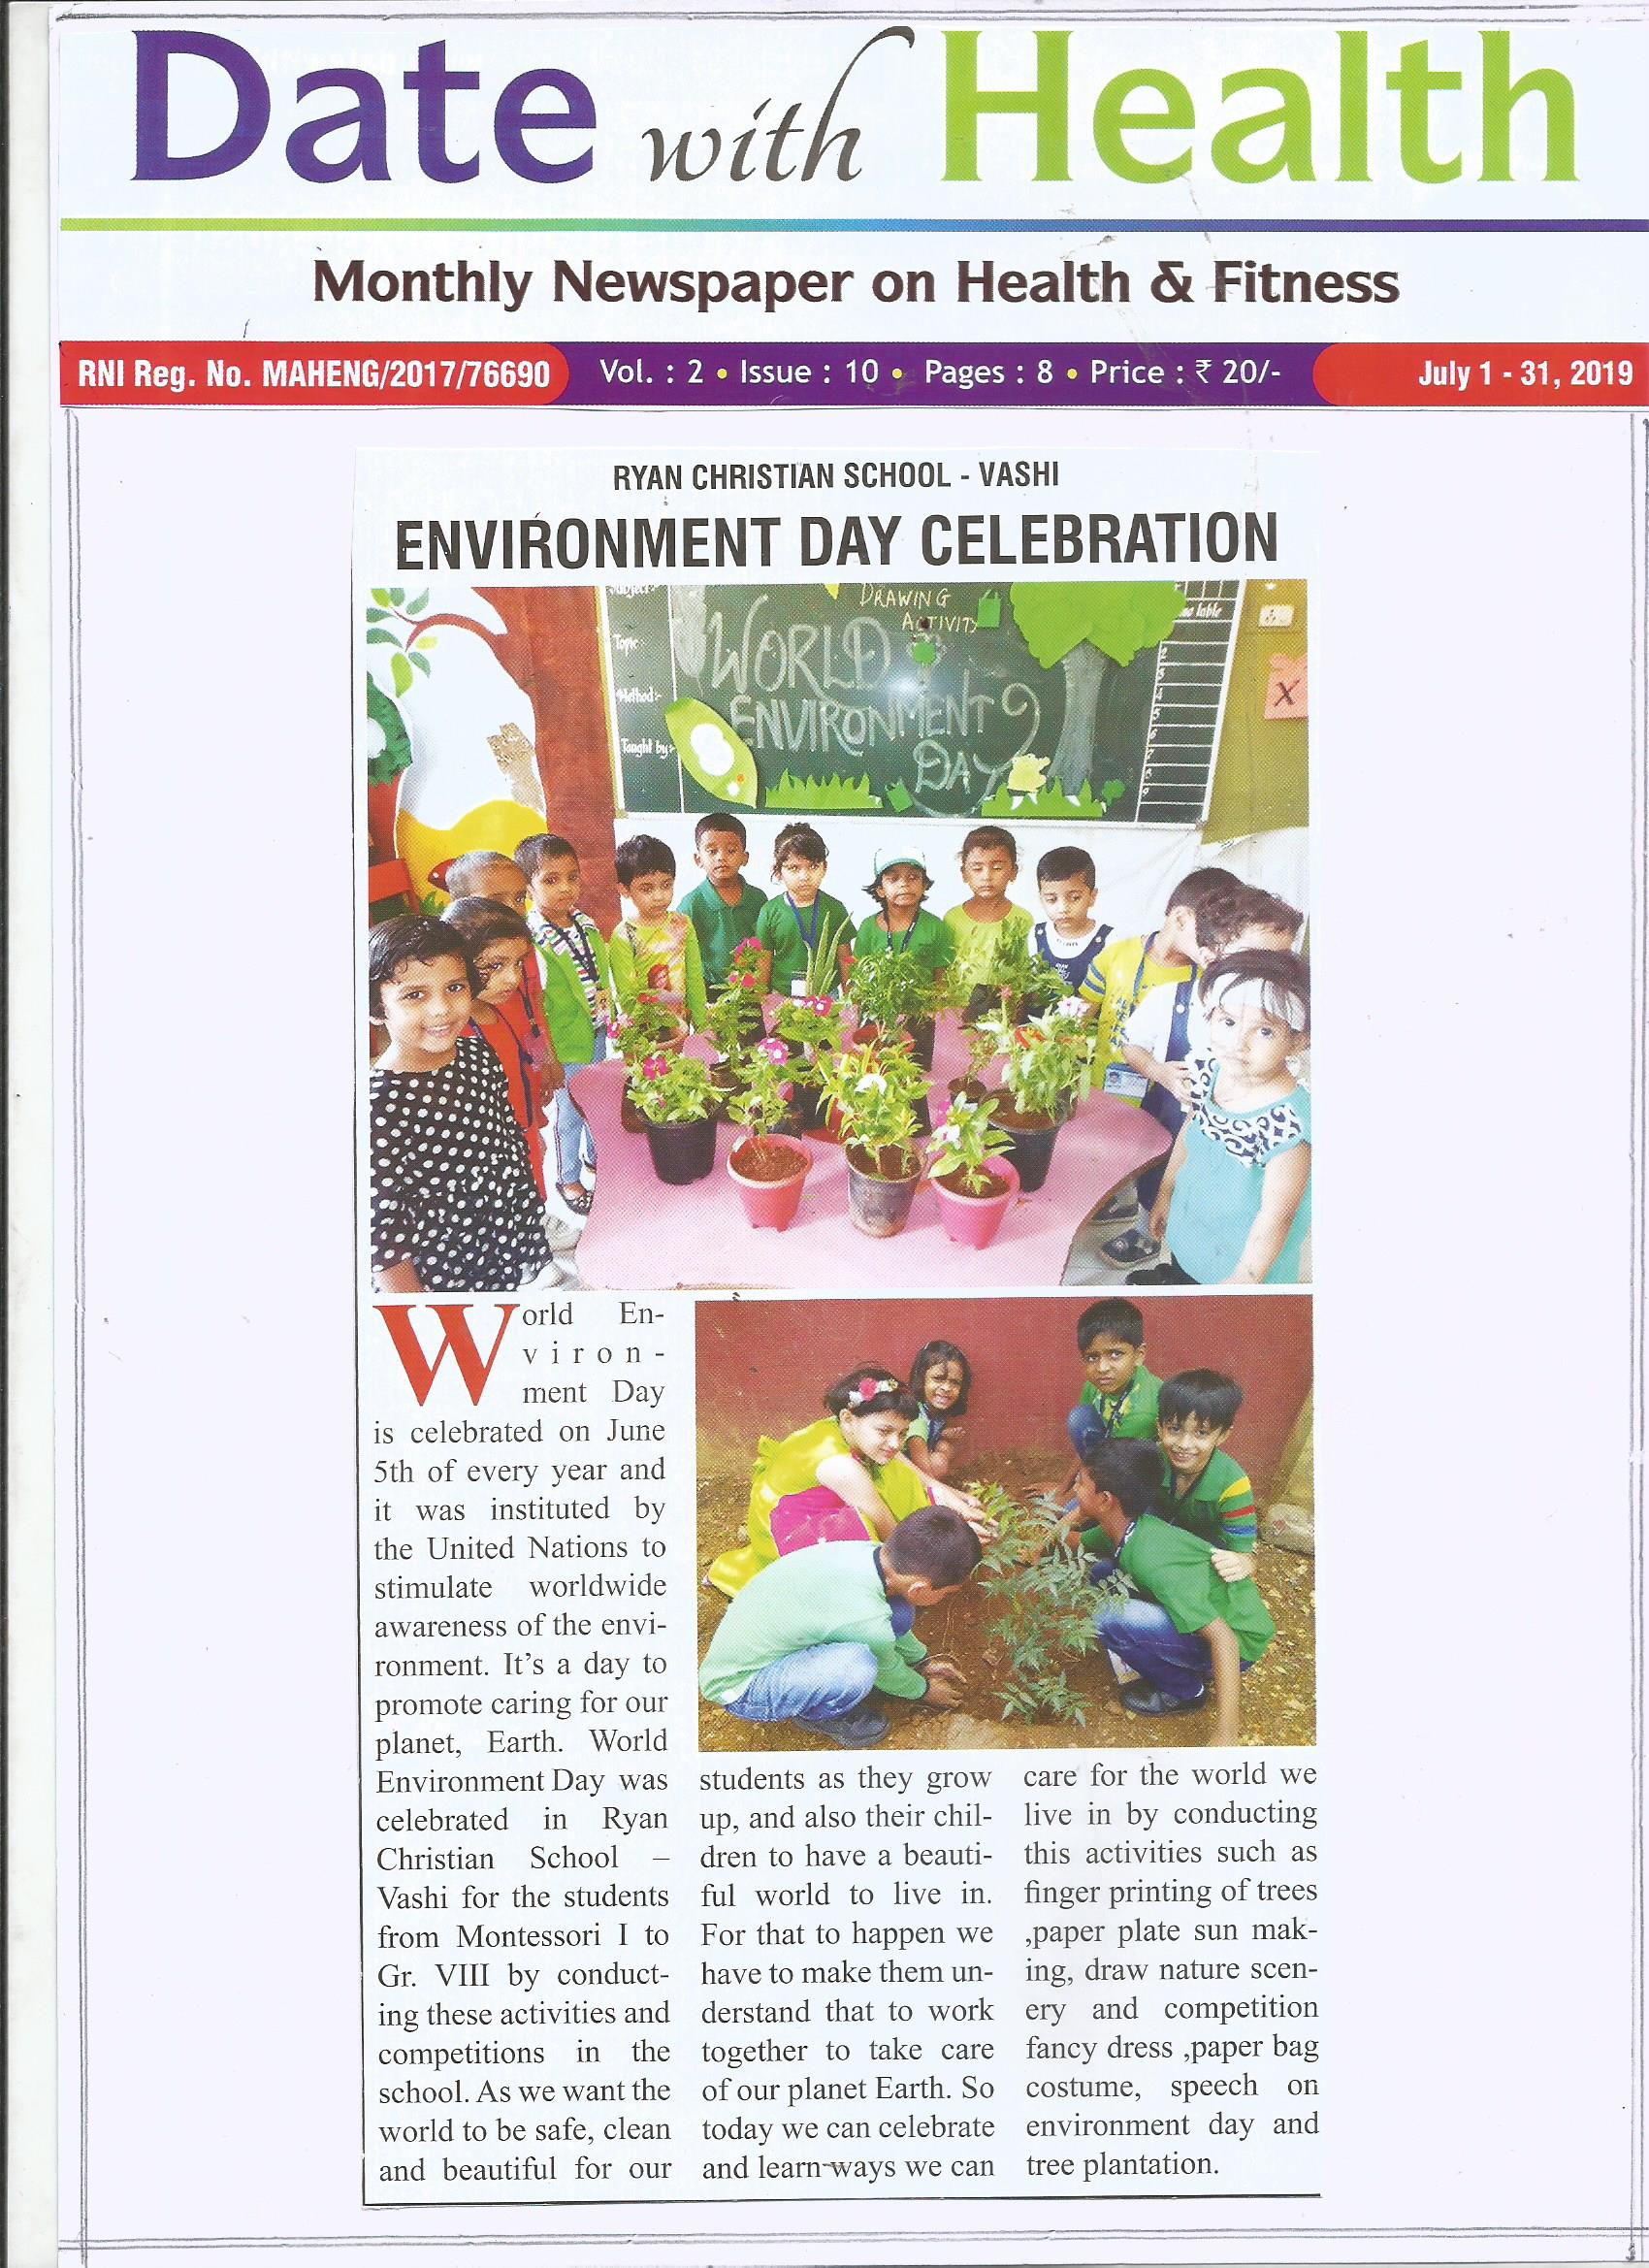 World Environment Day was featured in Date with Health